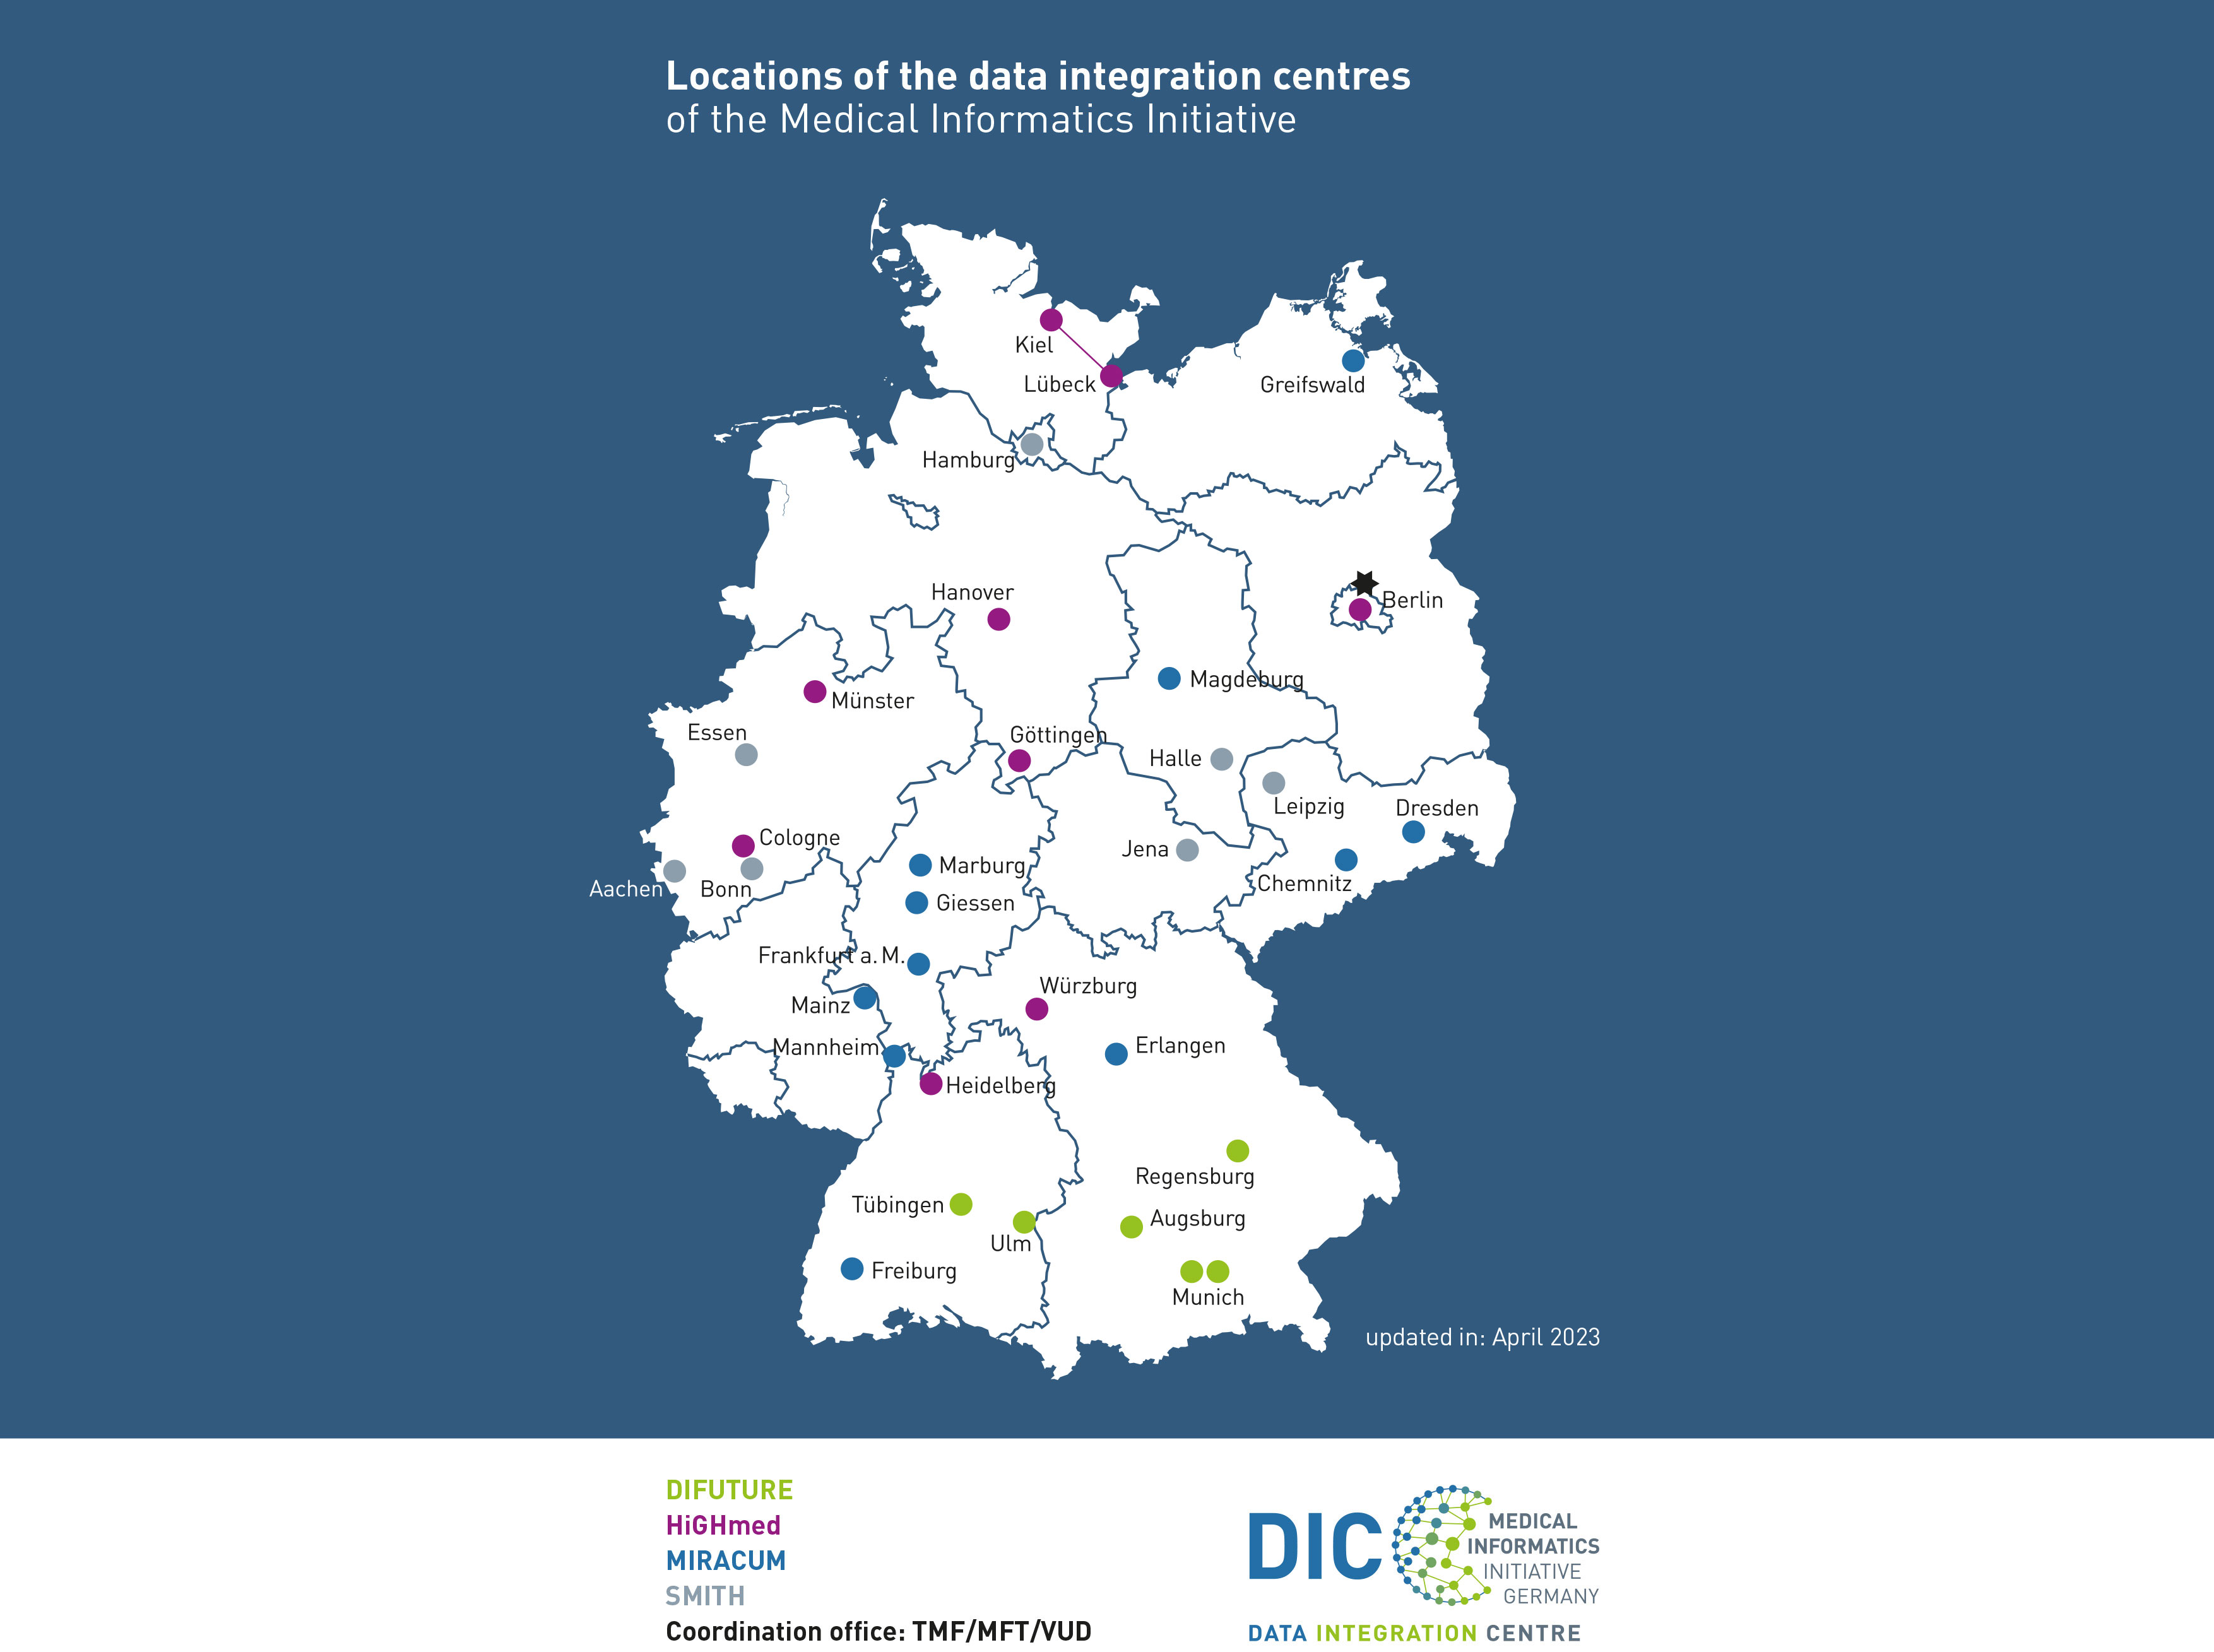 map of data integration centres of the MII